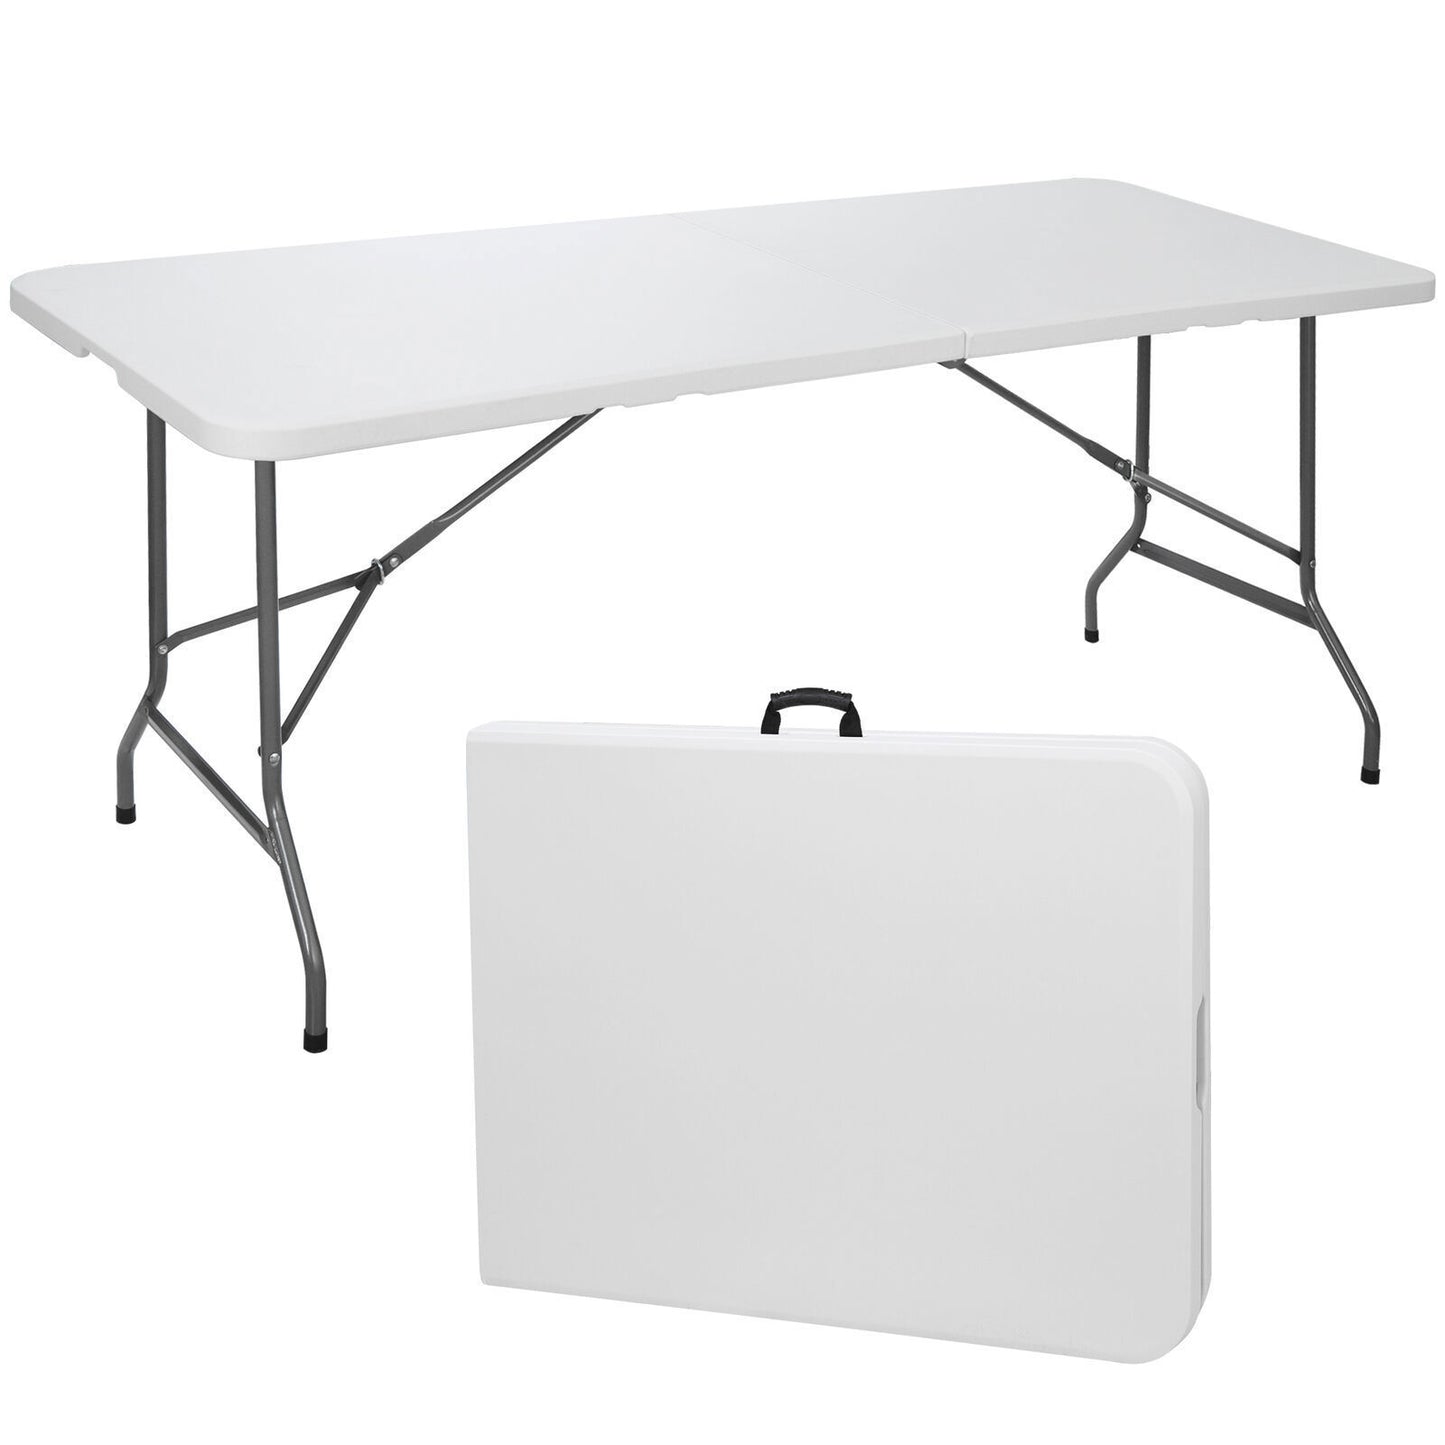 2PCS 6ft Folding Table Portable Indoor Outdoor Picnic Party Camping Tables